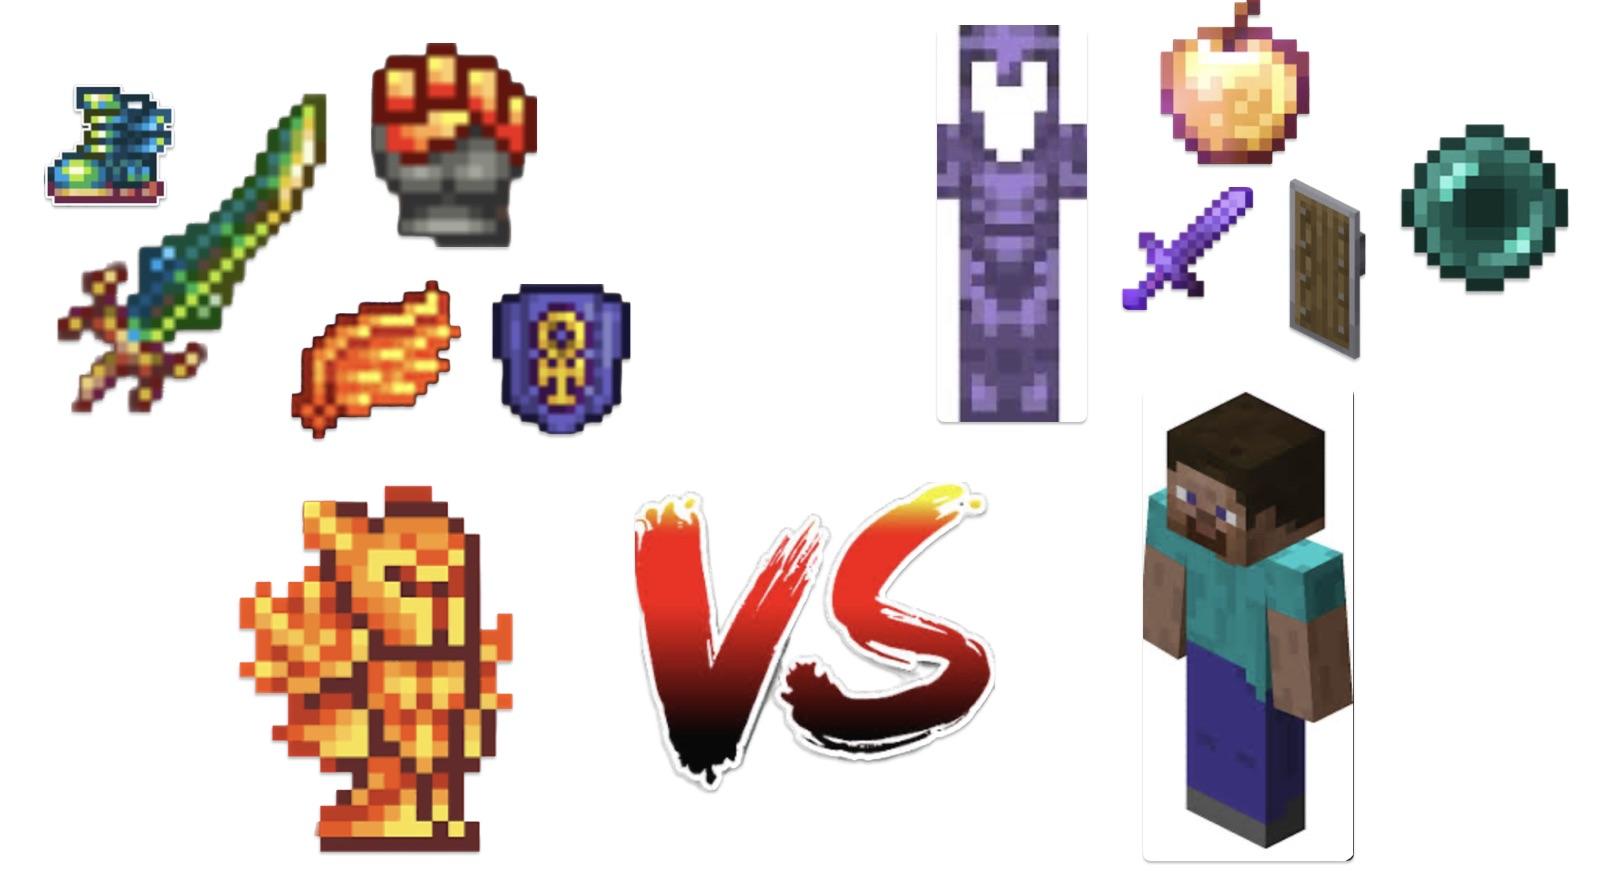 Minecraft Memes - Who Would Win? Survival vs. Cheat